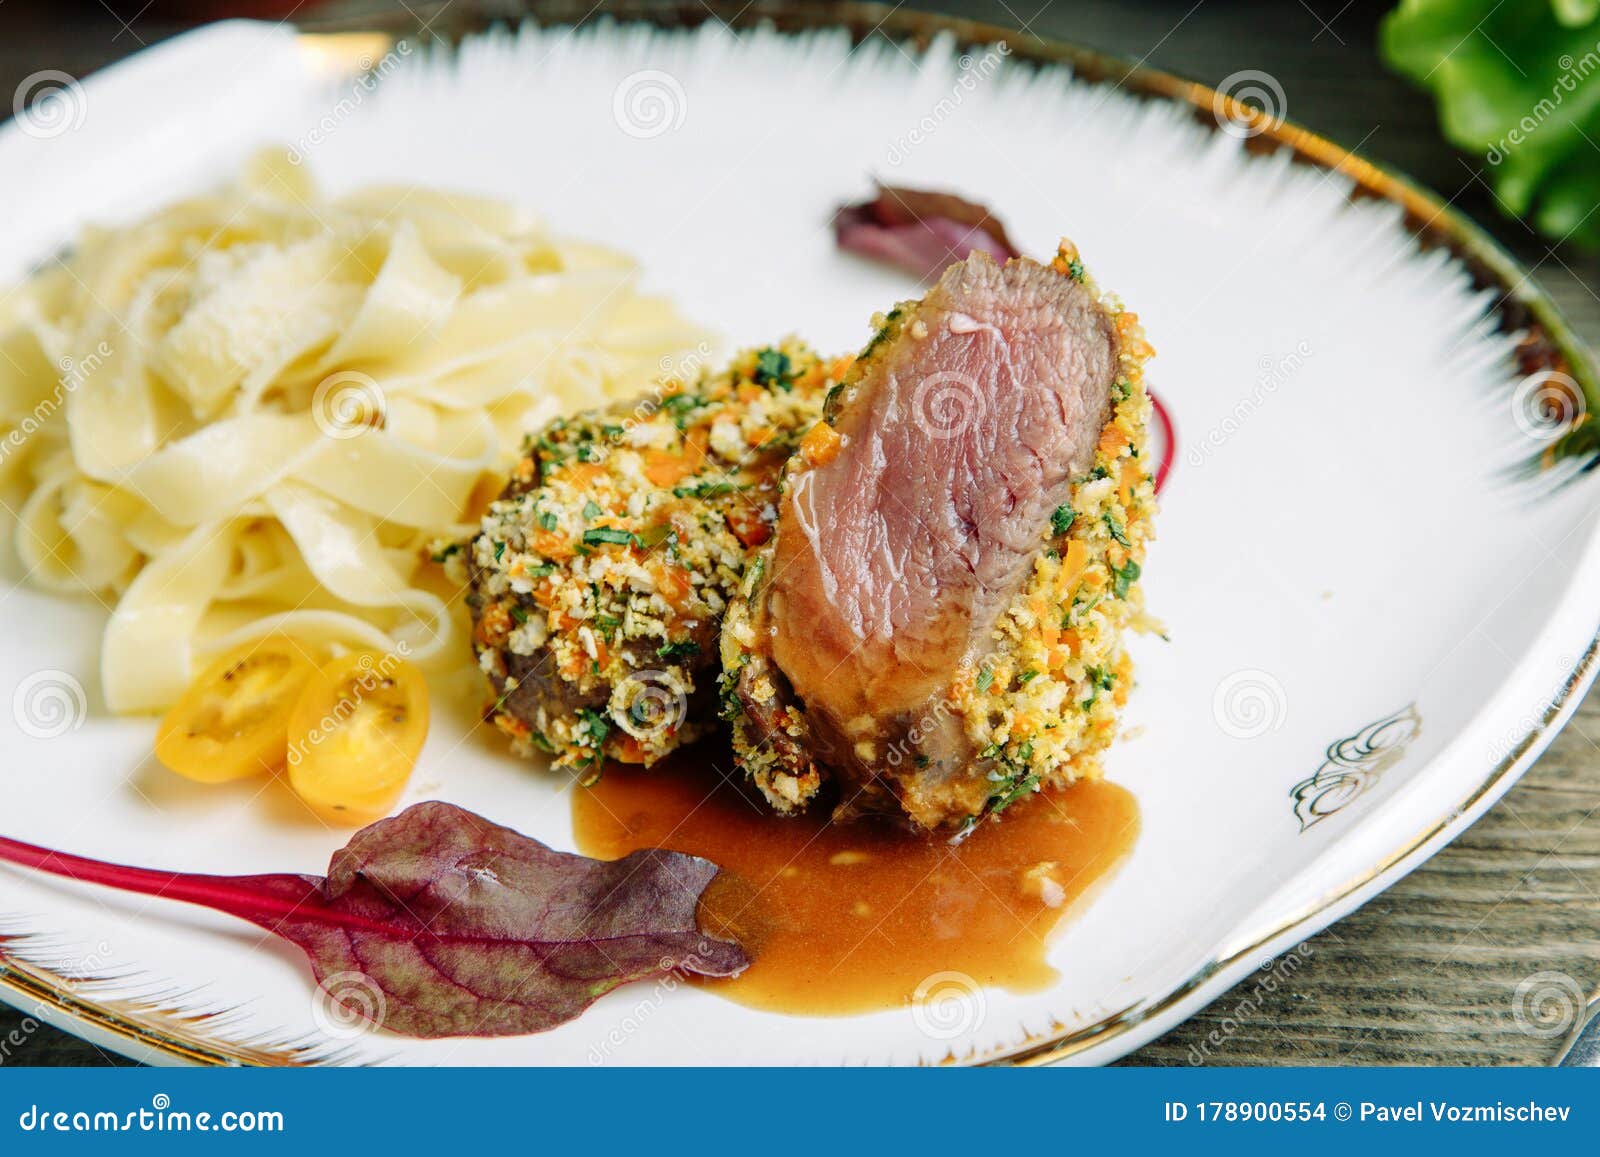 beef medium reir with macaroni on a plate